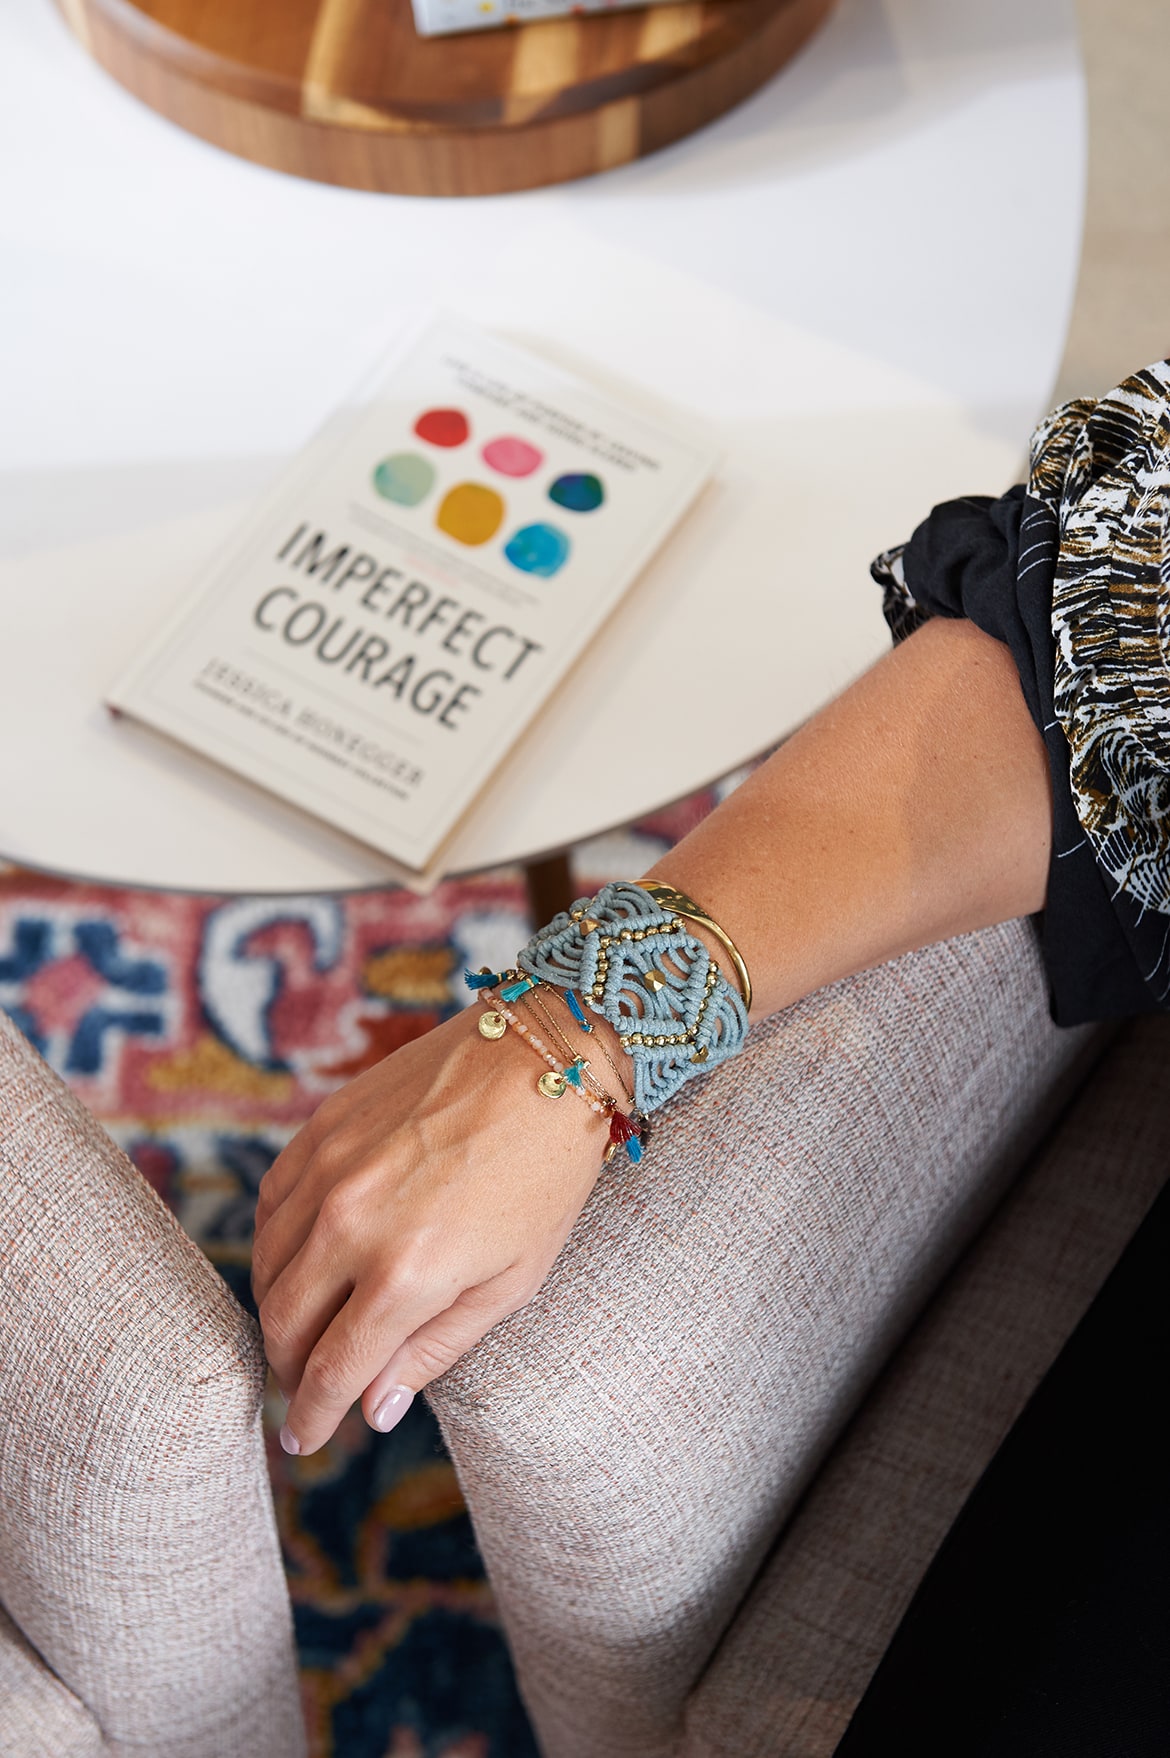 Noonday collection bracelets and imperfect courage